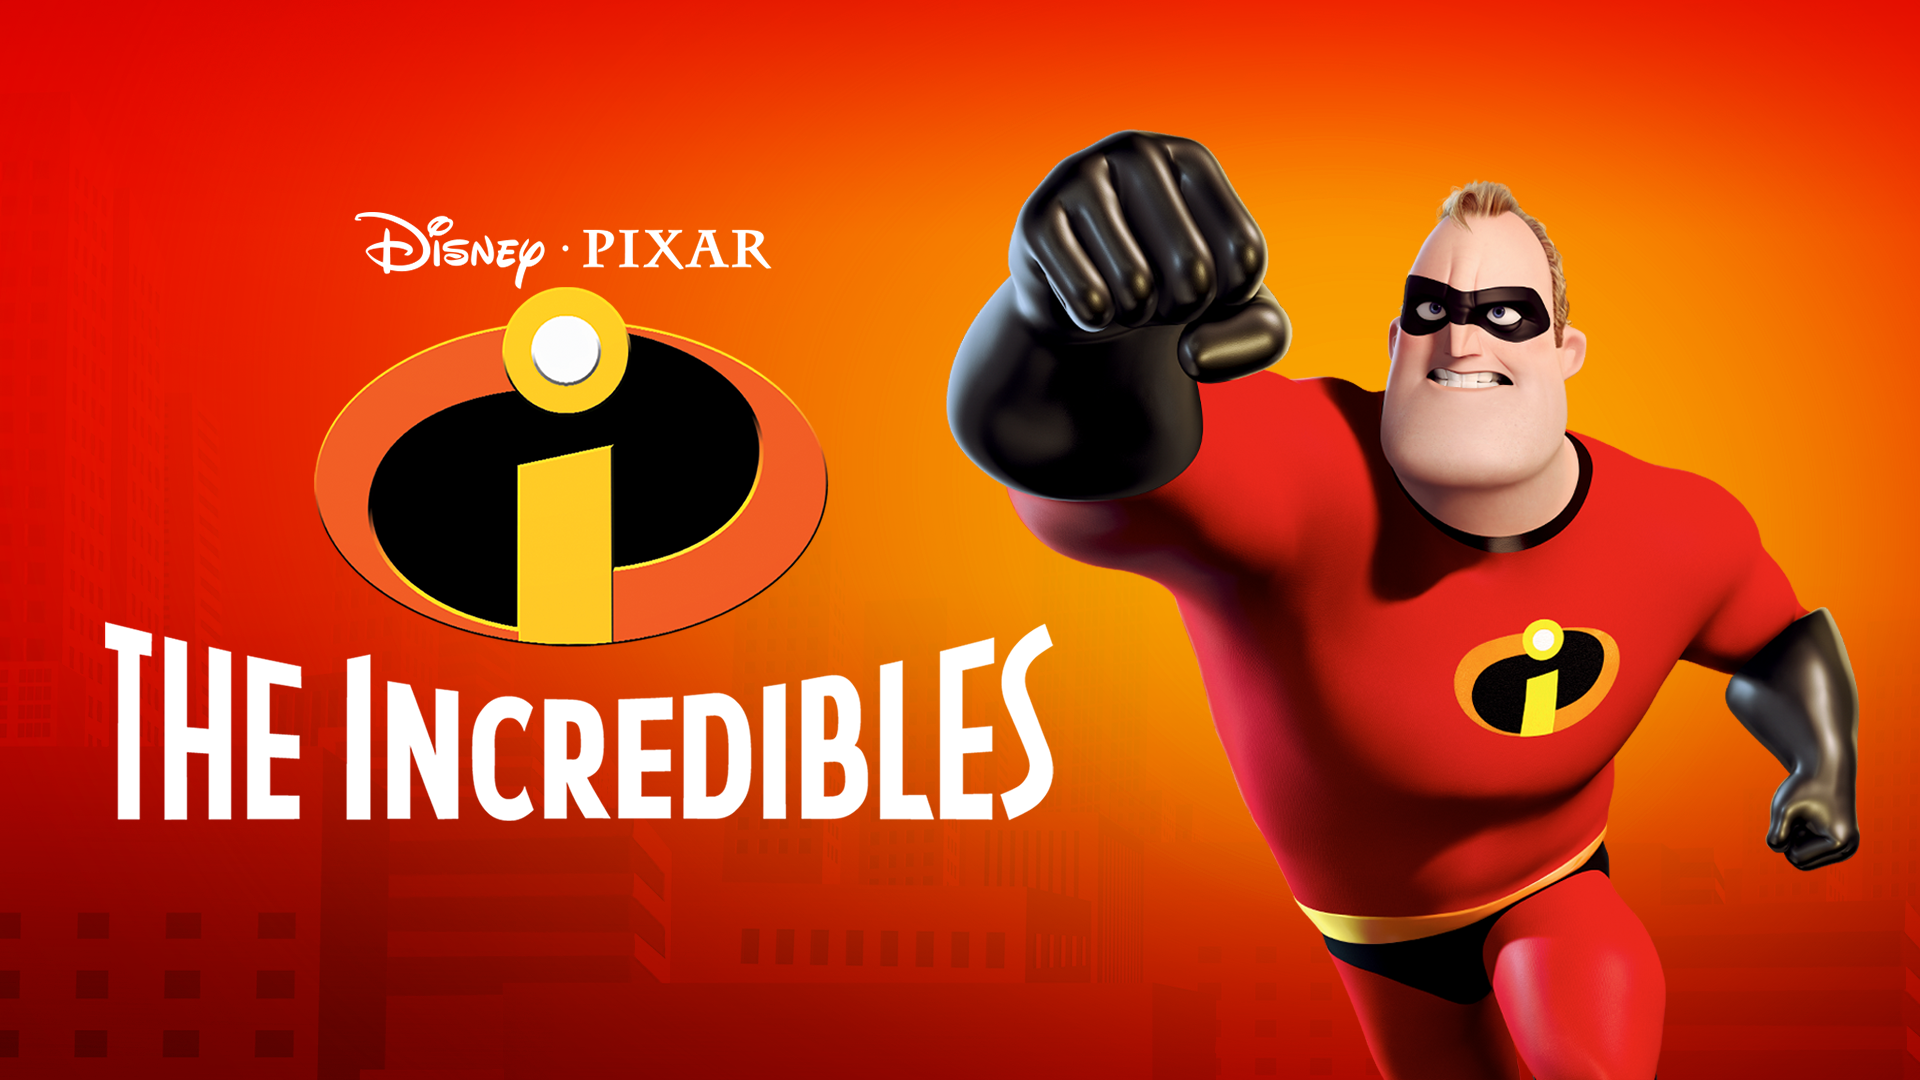 Where to watch The Incredibles online in Australia